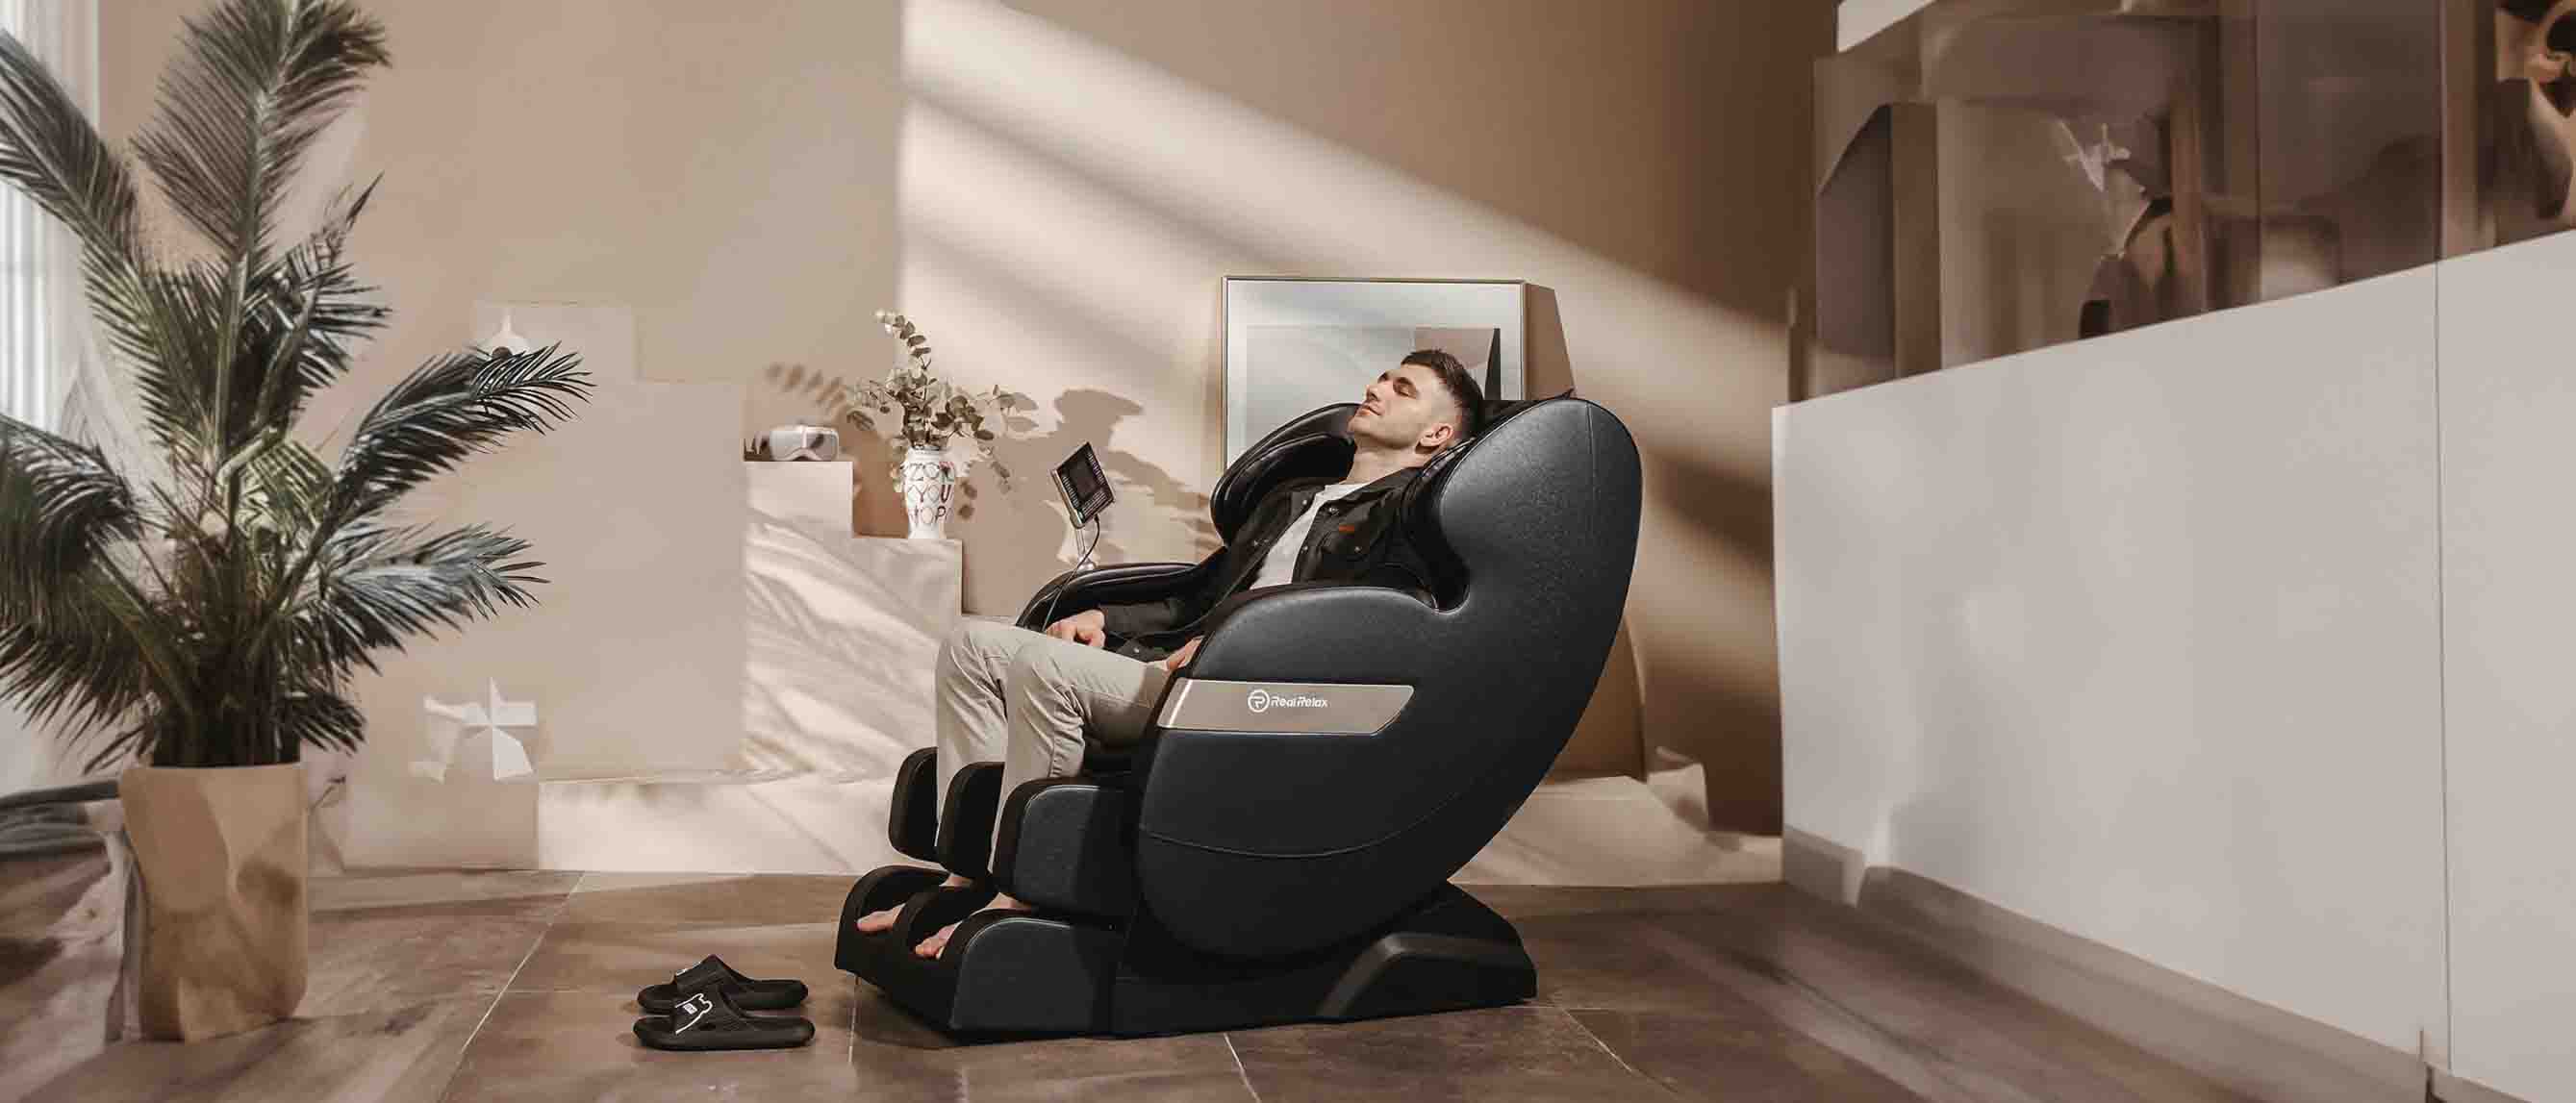 Image of man on massage chair in living room